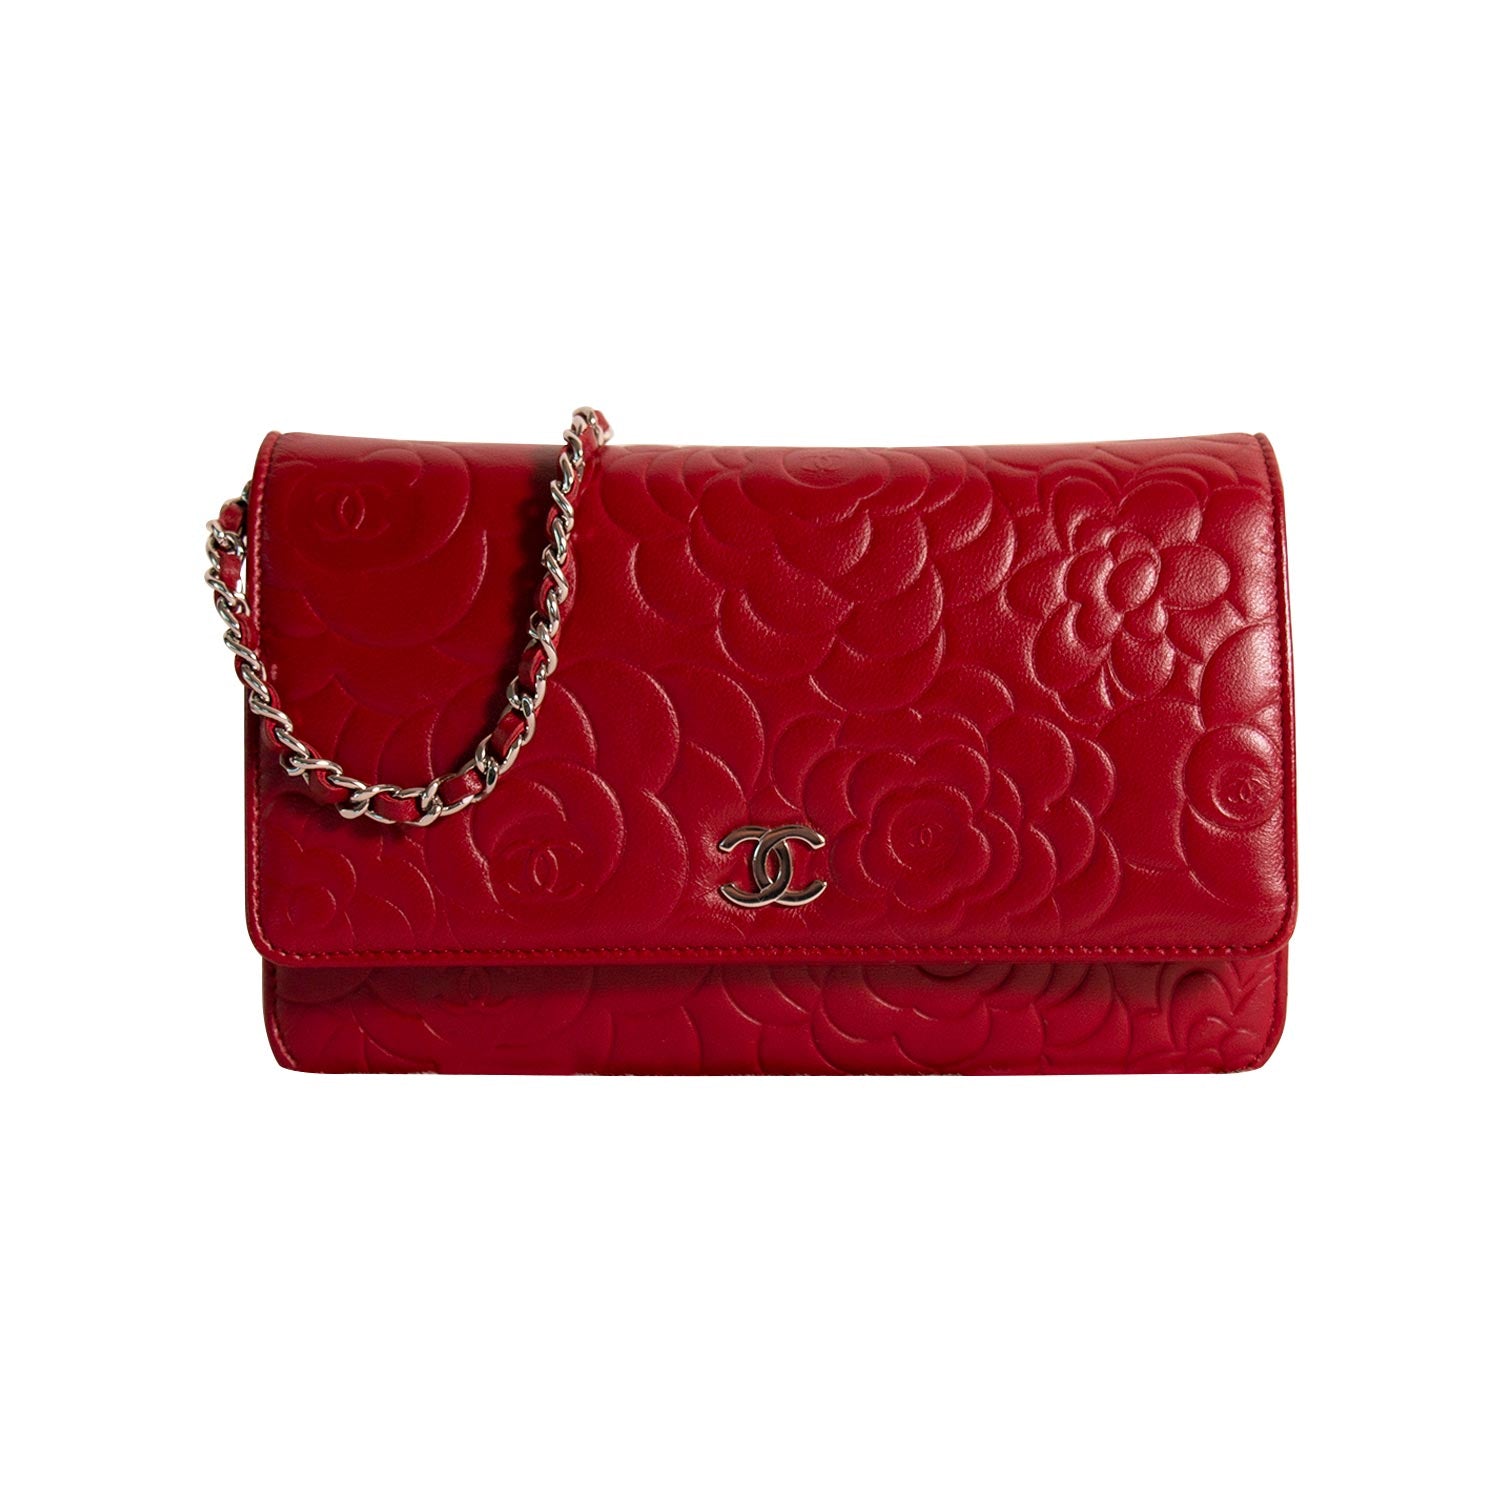 Shop authentic Chanel Camelia Flower Wallet on Chain at revogue